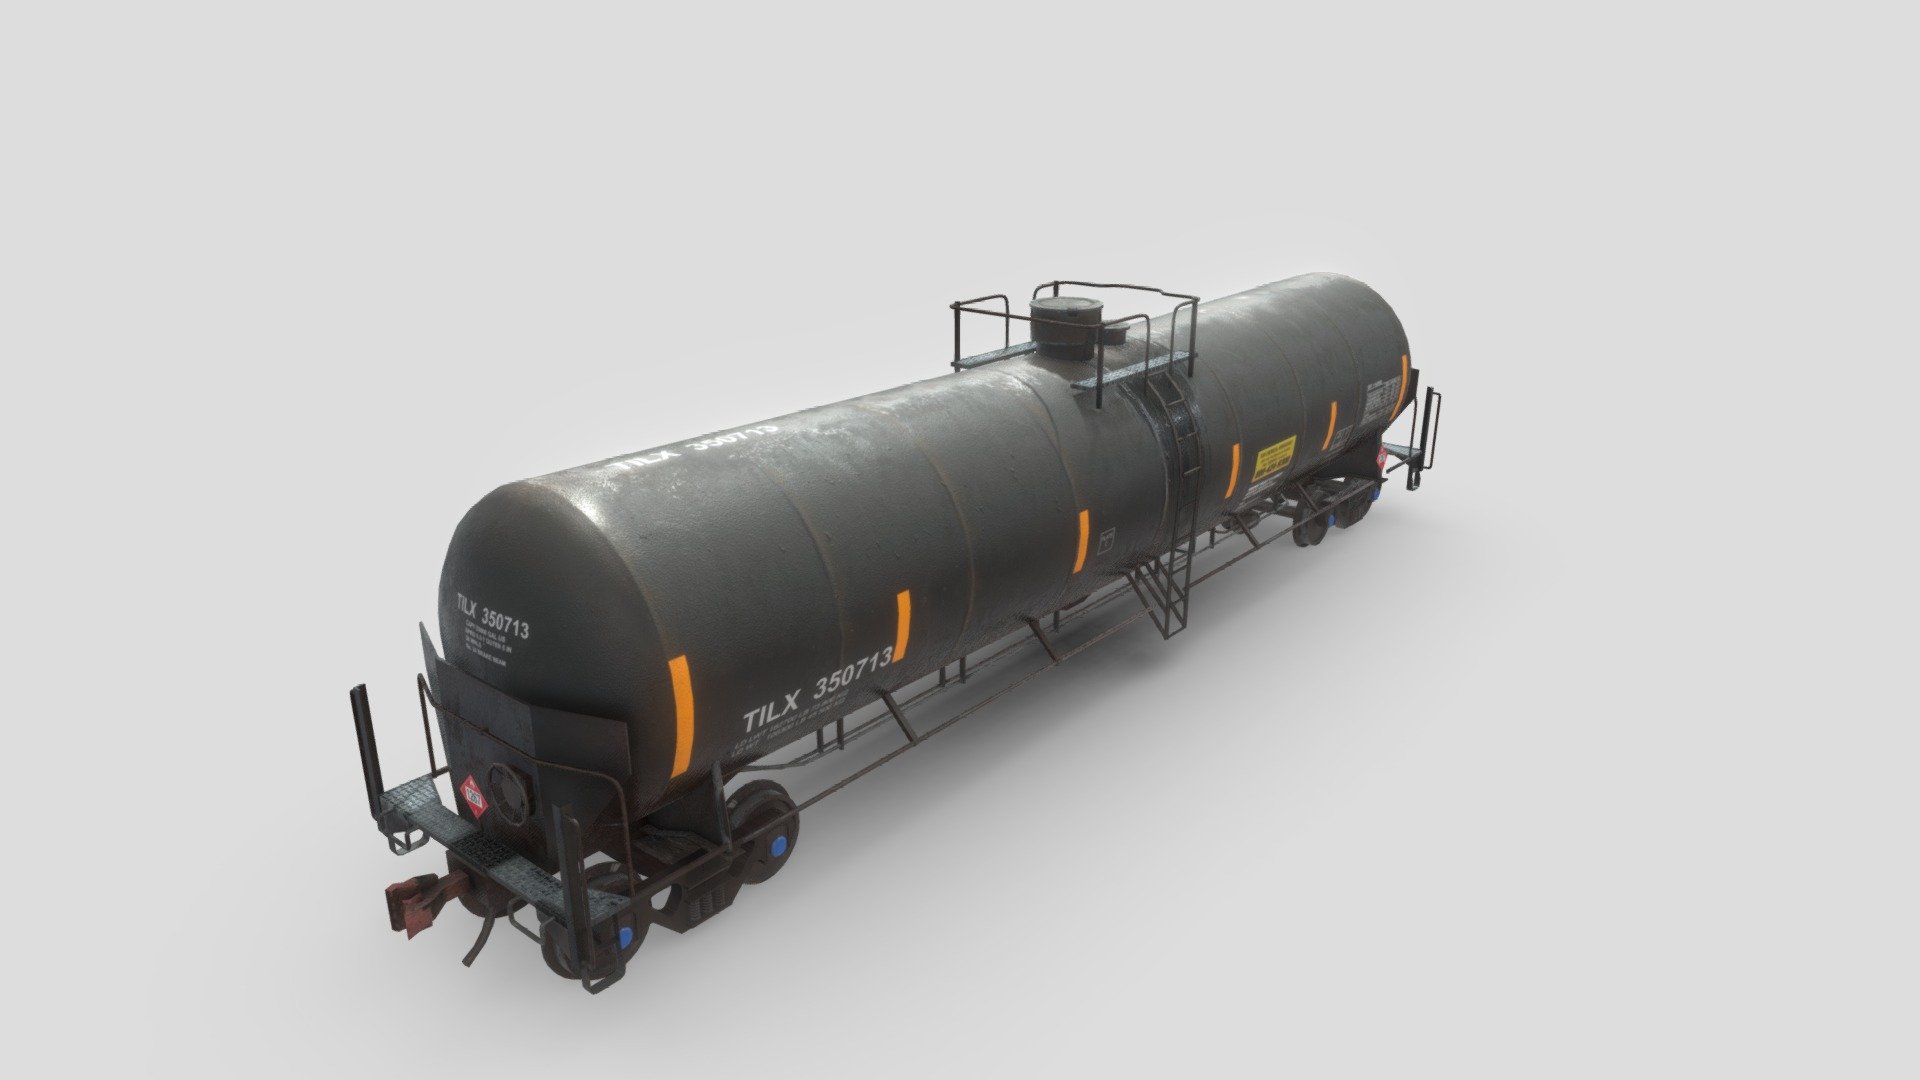 North American unpressurized tank car, originally made in 1967, with version 117 announced at 2015.

Commissioned model for game Workers &amp; Resources: Soviet Republic 3d model